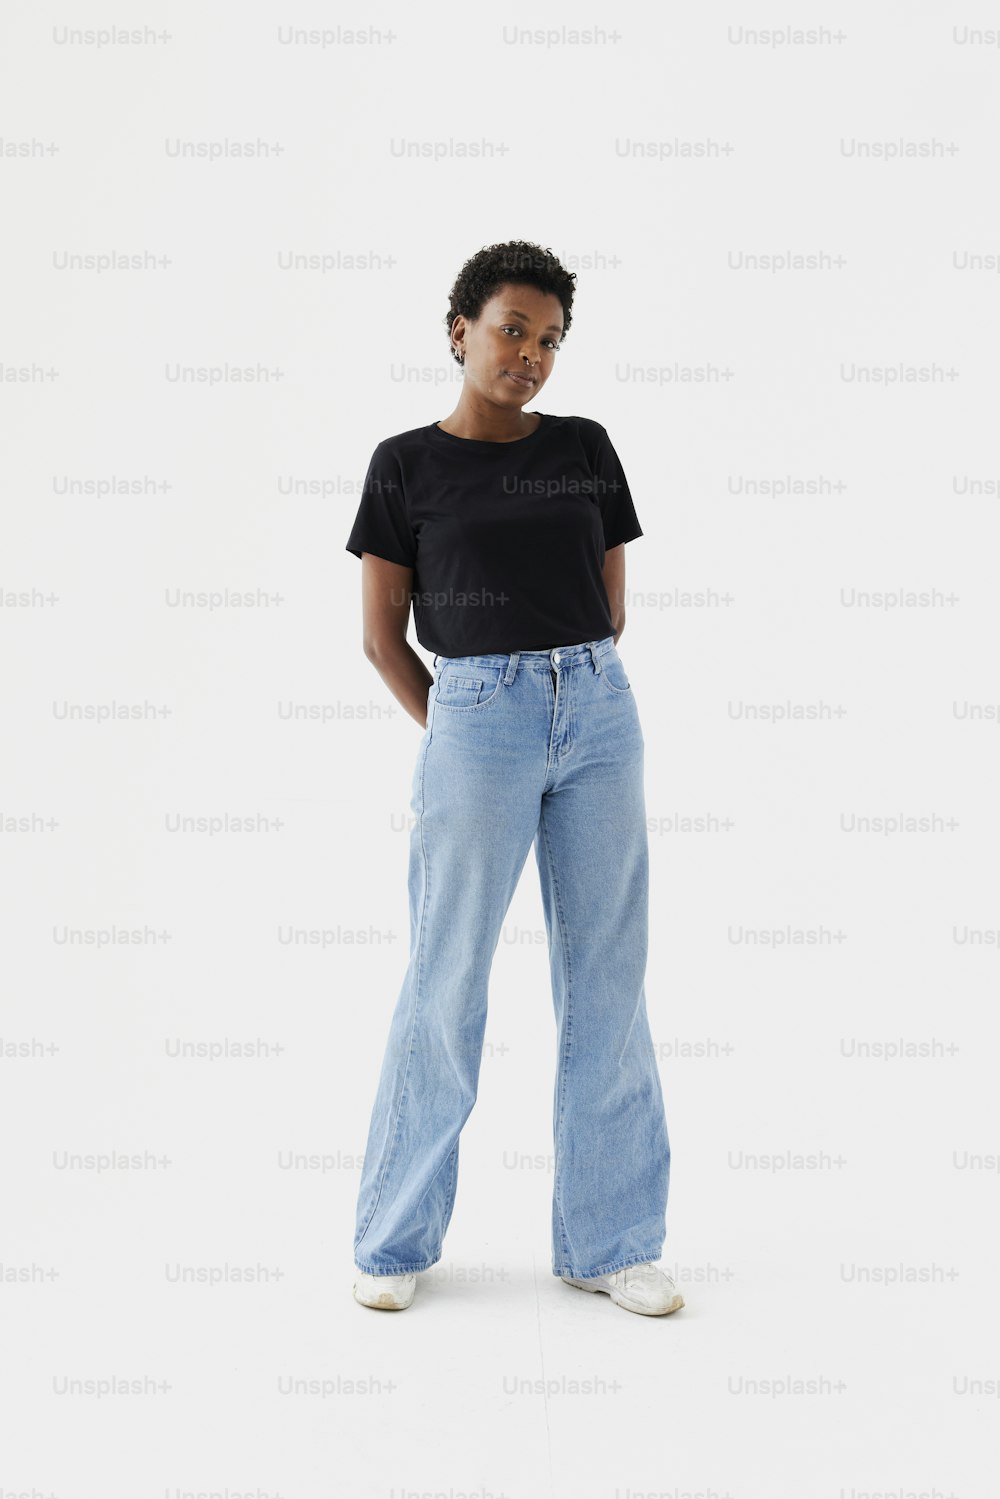 Premium Photo  A woman in a black shirt and black pants stands in